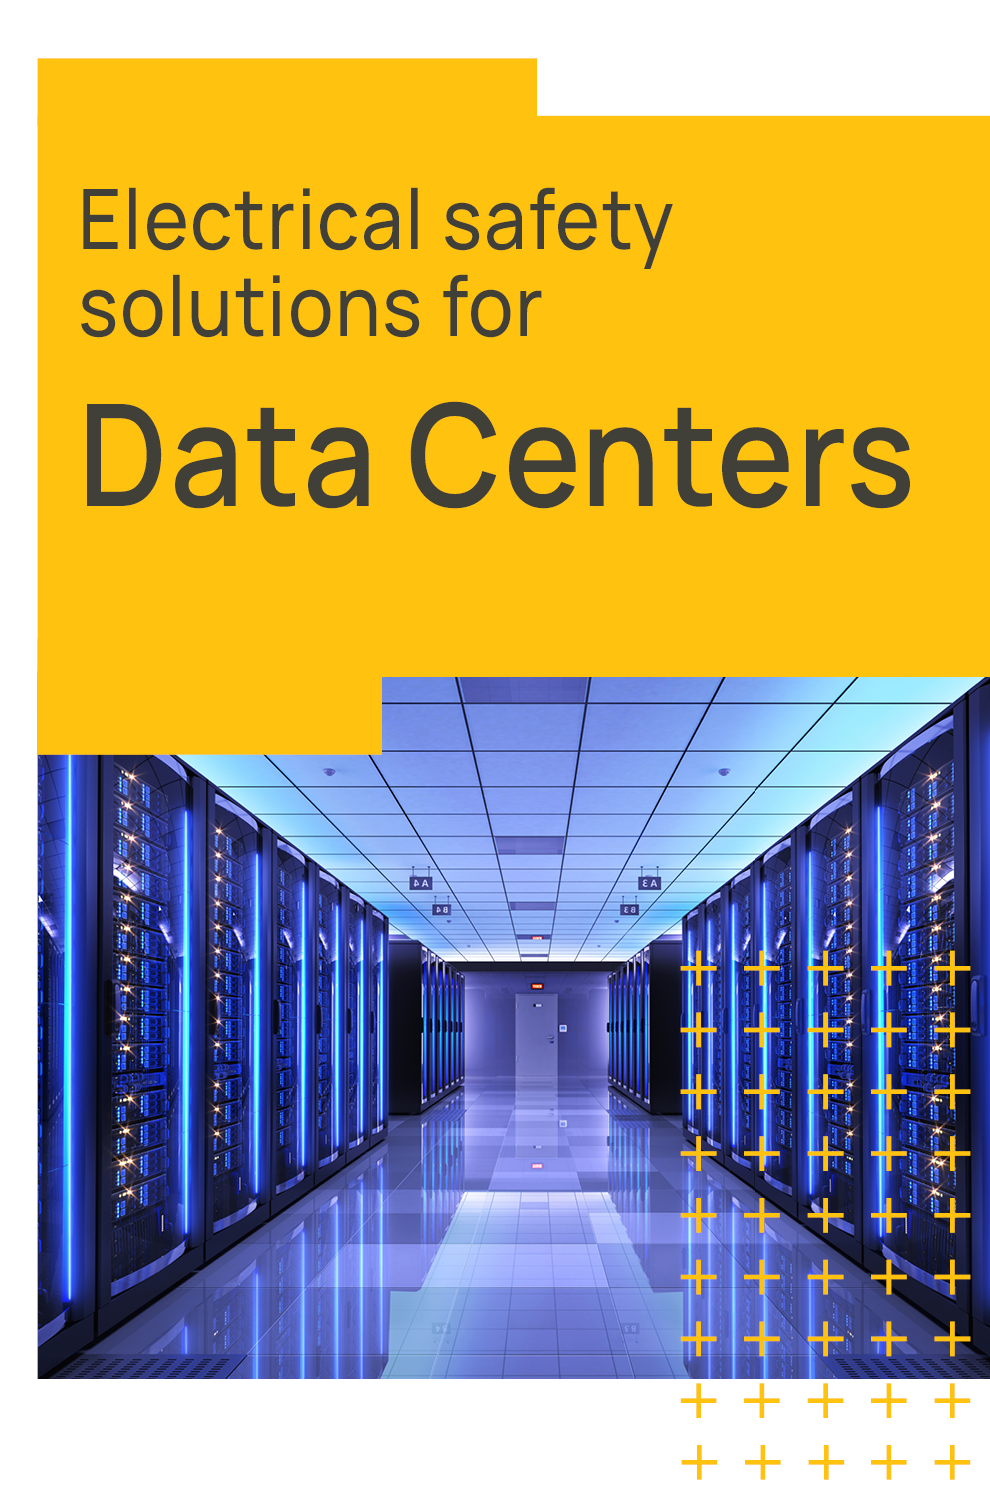 Electrical Safety for Data Centers Brochure